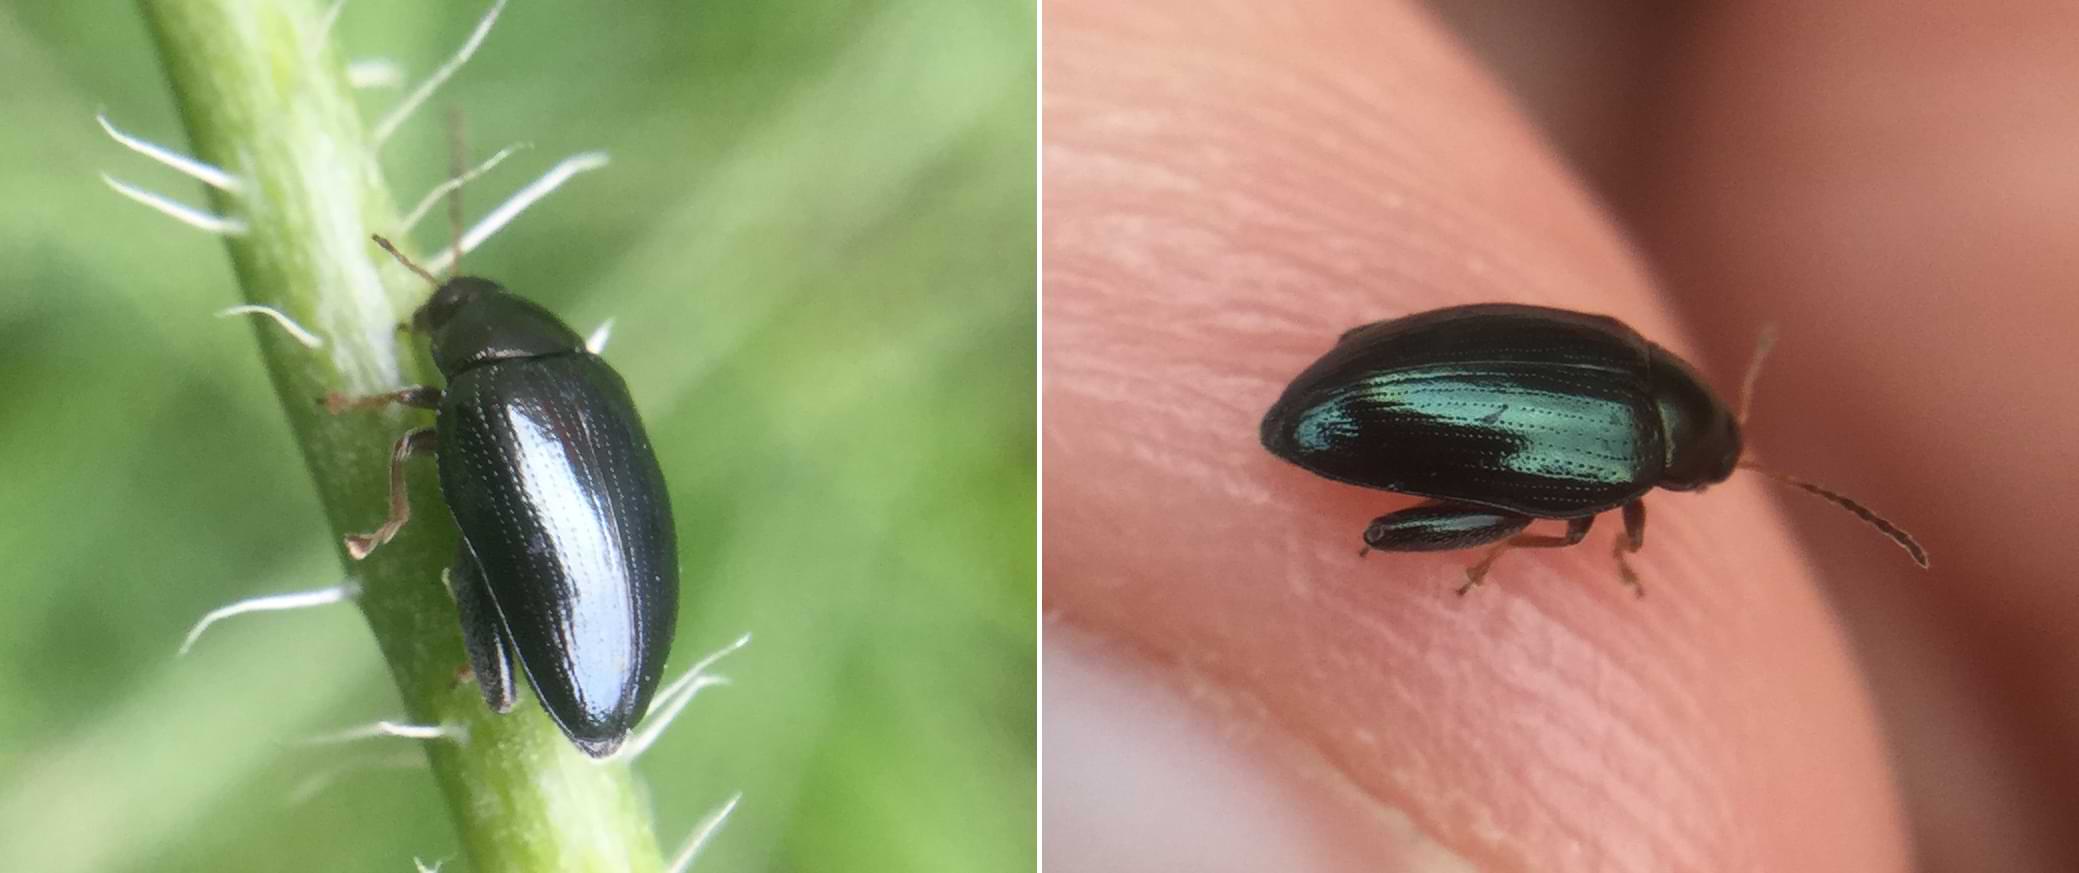 Two close up photos of a tiny black beetle. Its wing case is shiny and covered in small pores.